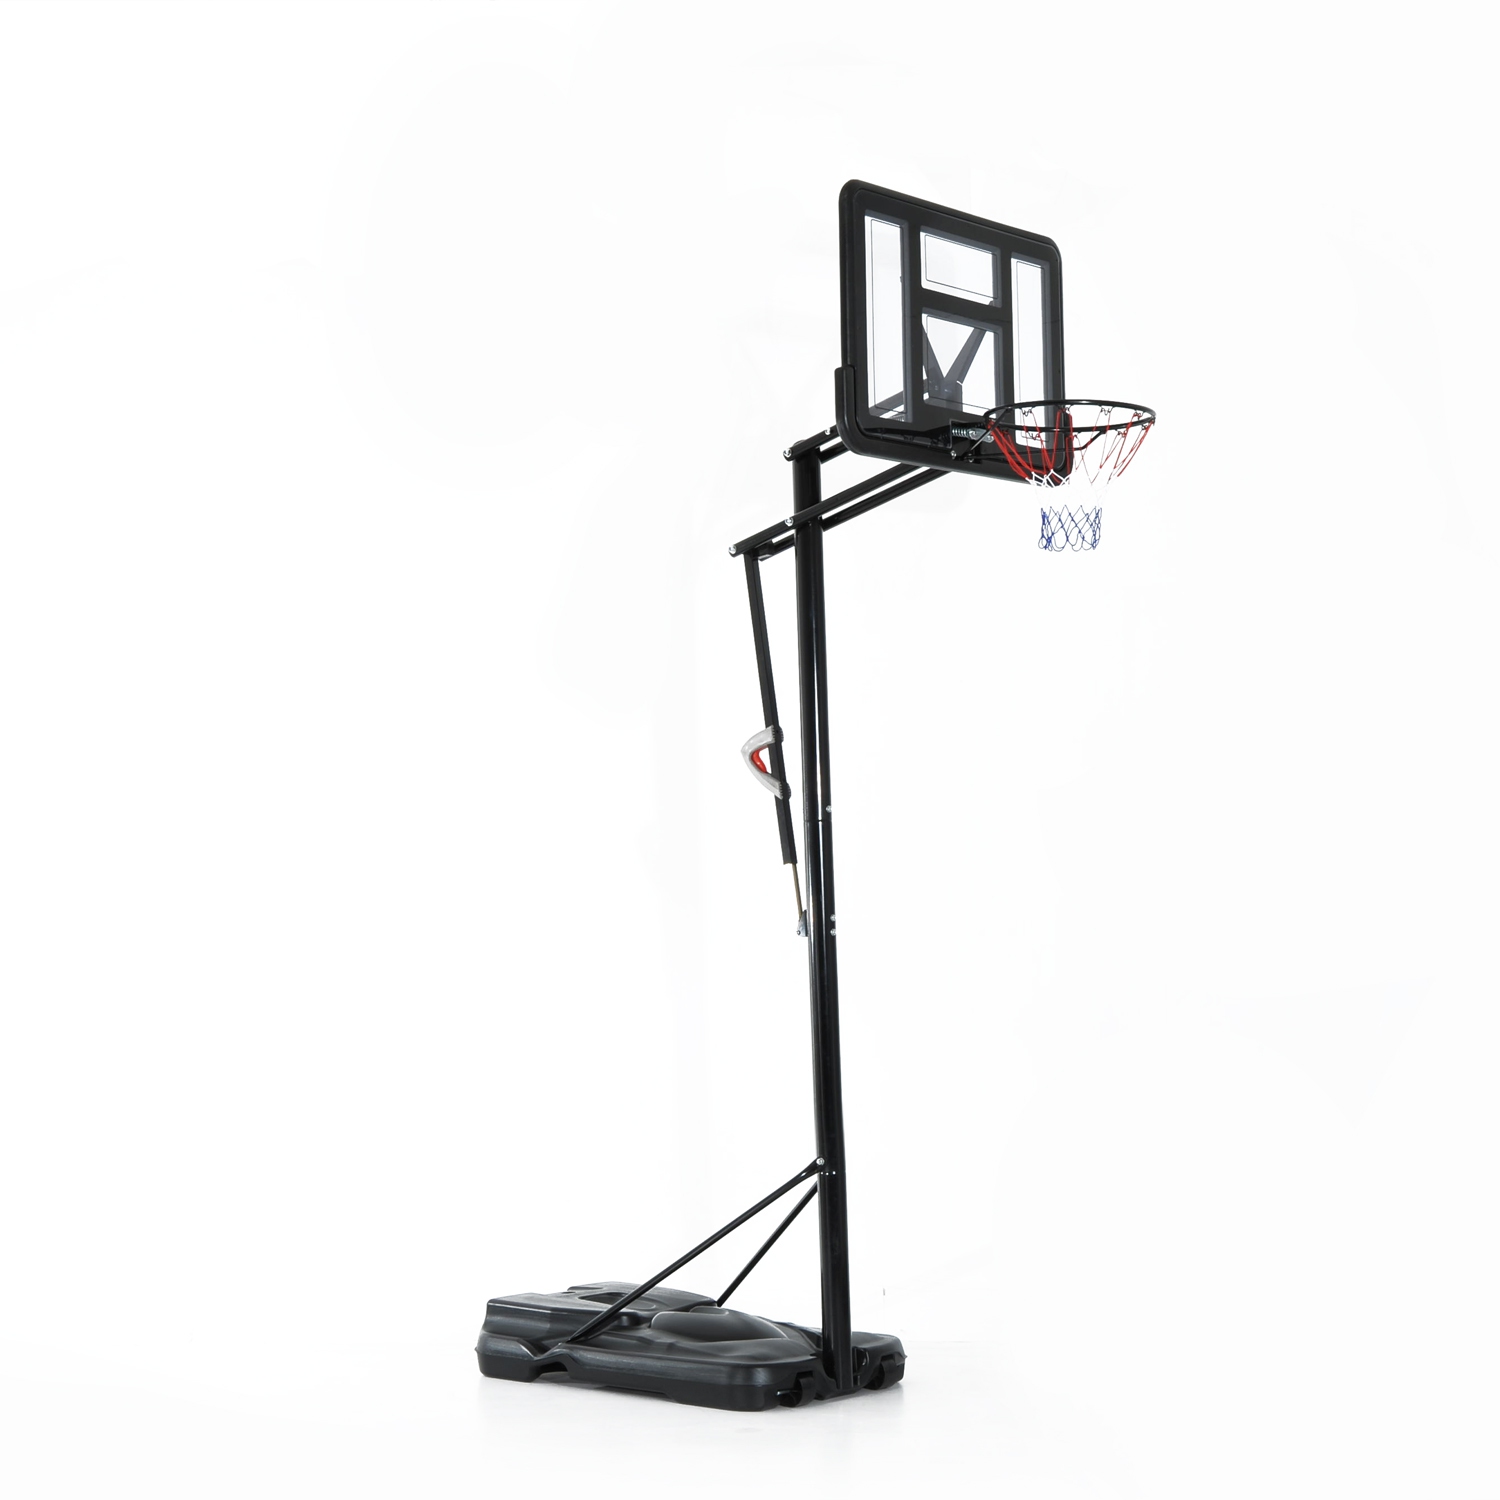 Soozier Mobile Basketball Stand Basketball Hoop With Stand